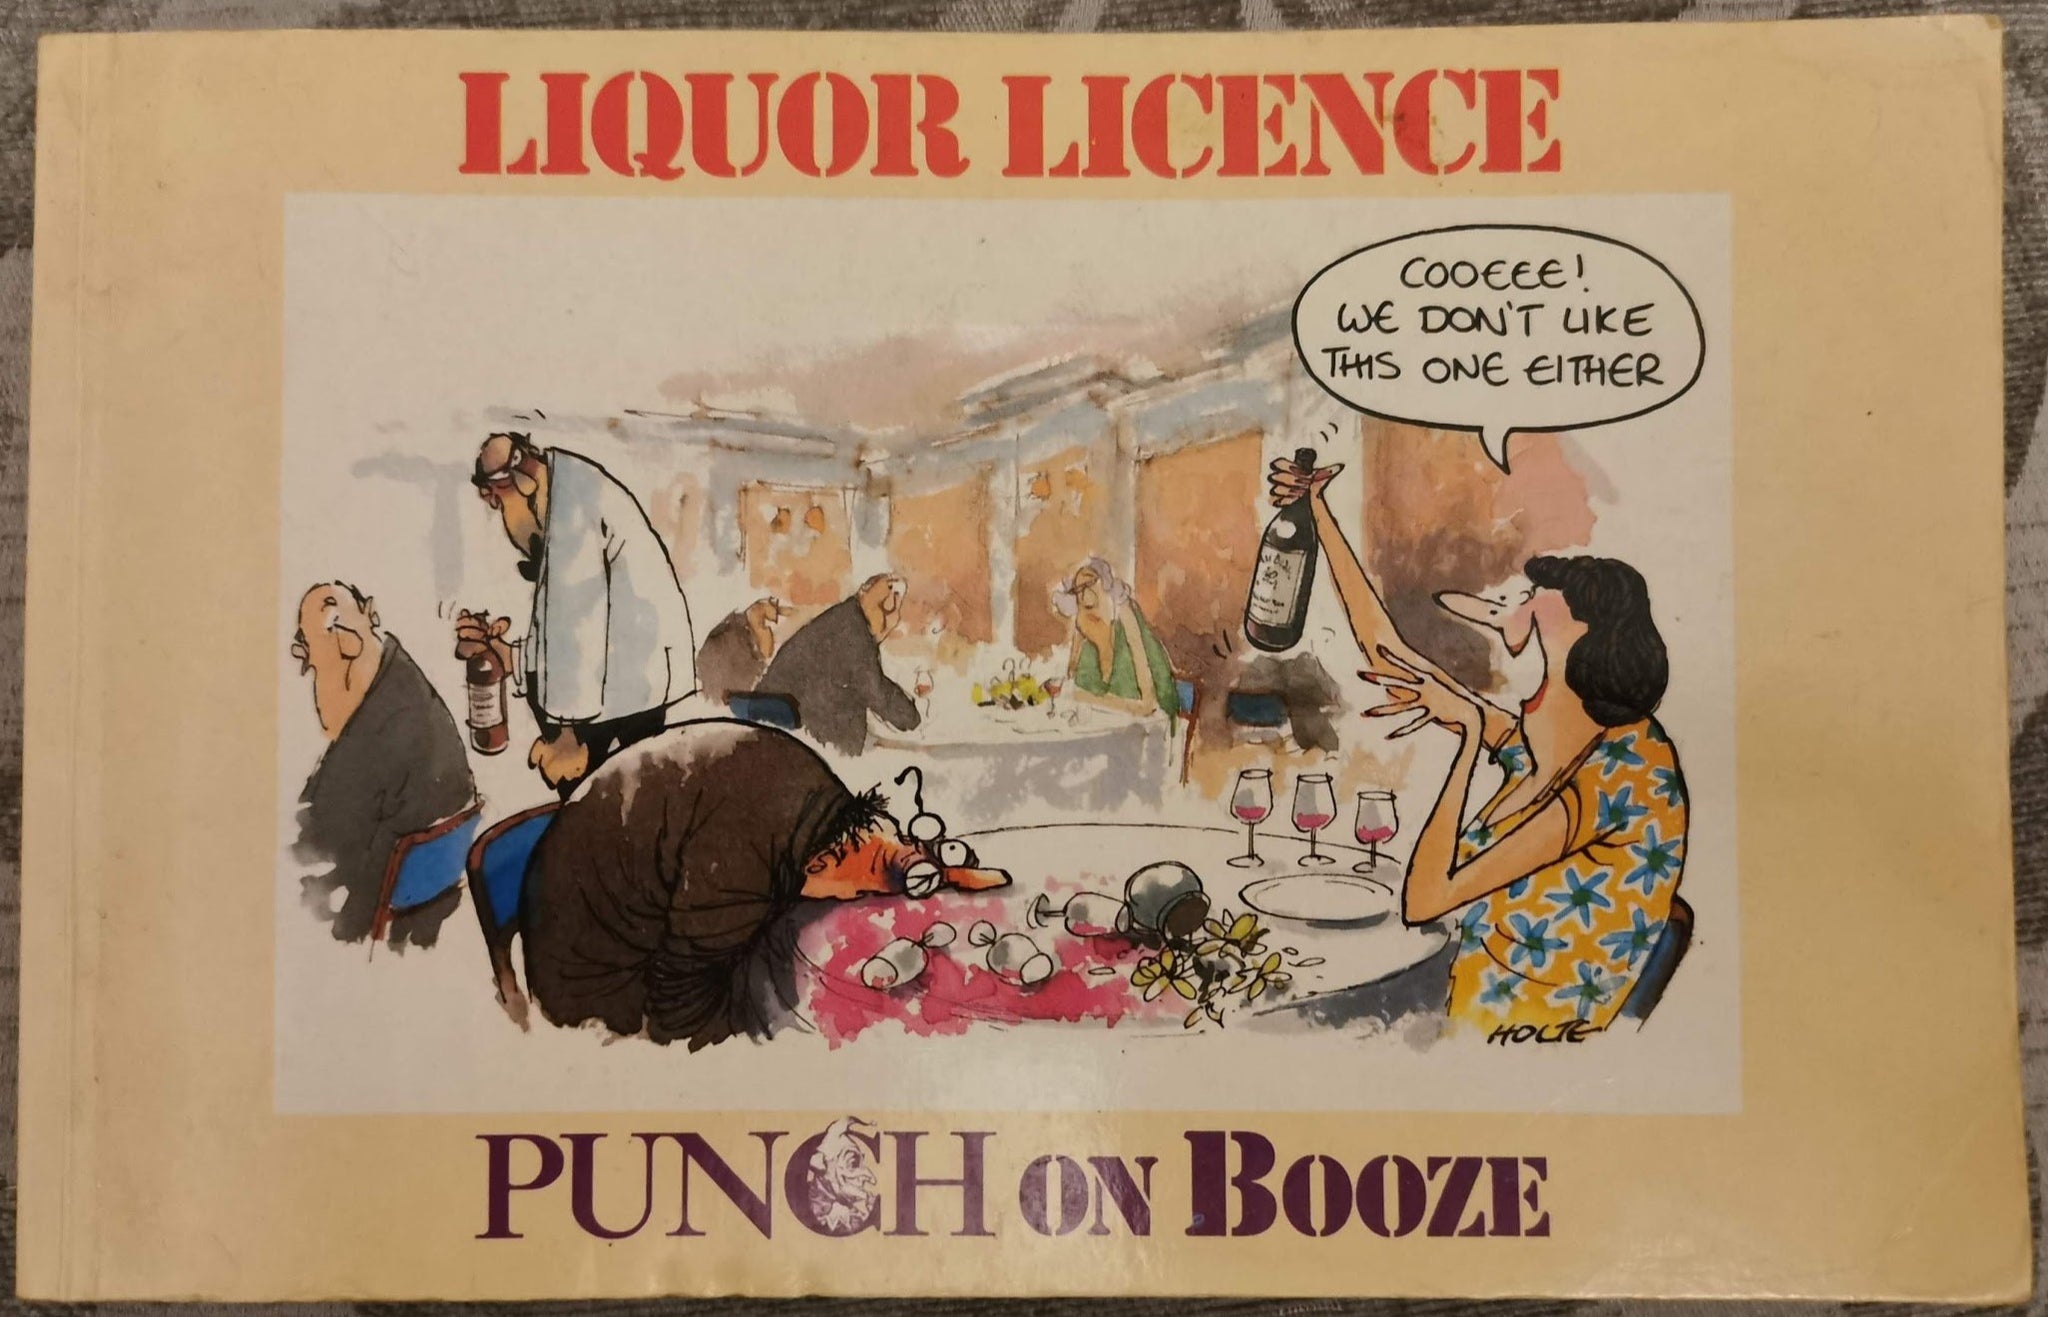 Liquor Licence: "Punch" on Booze by William Hewison